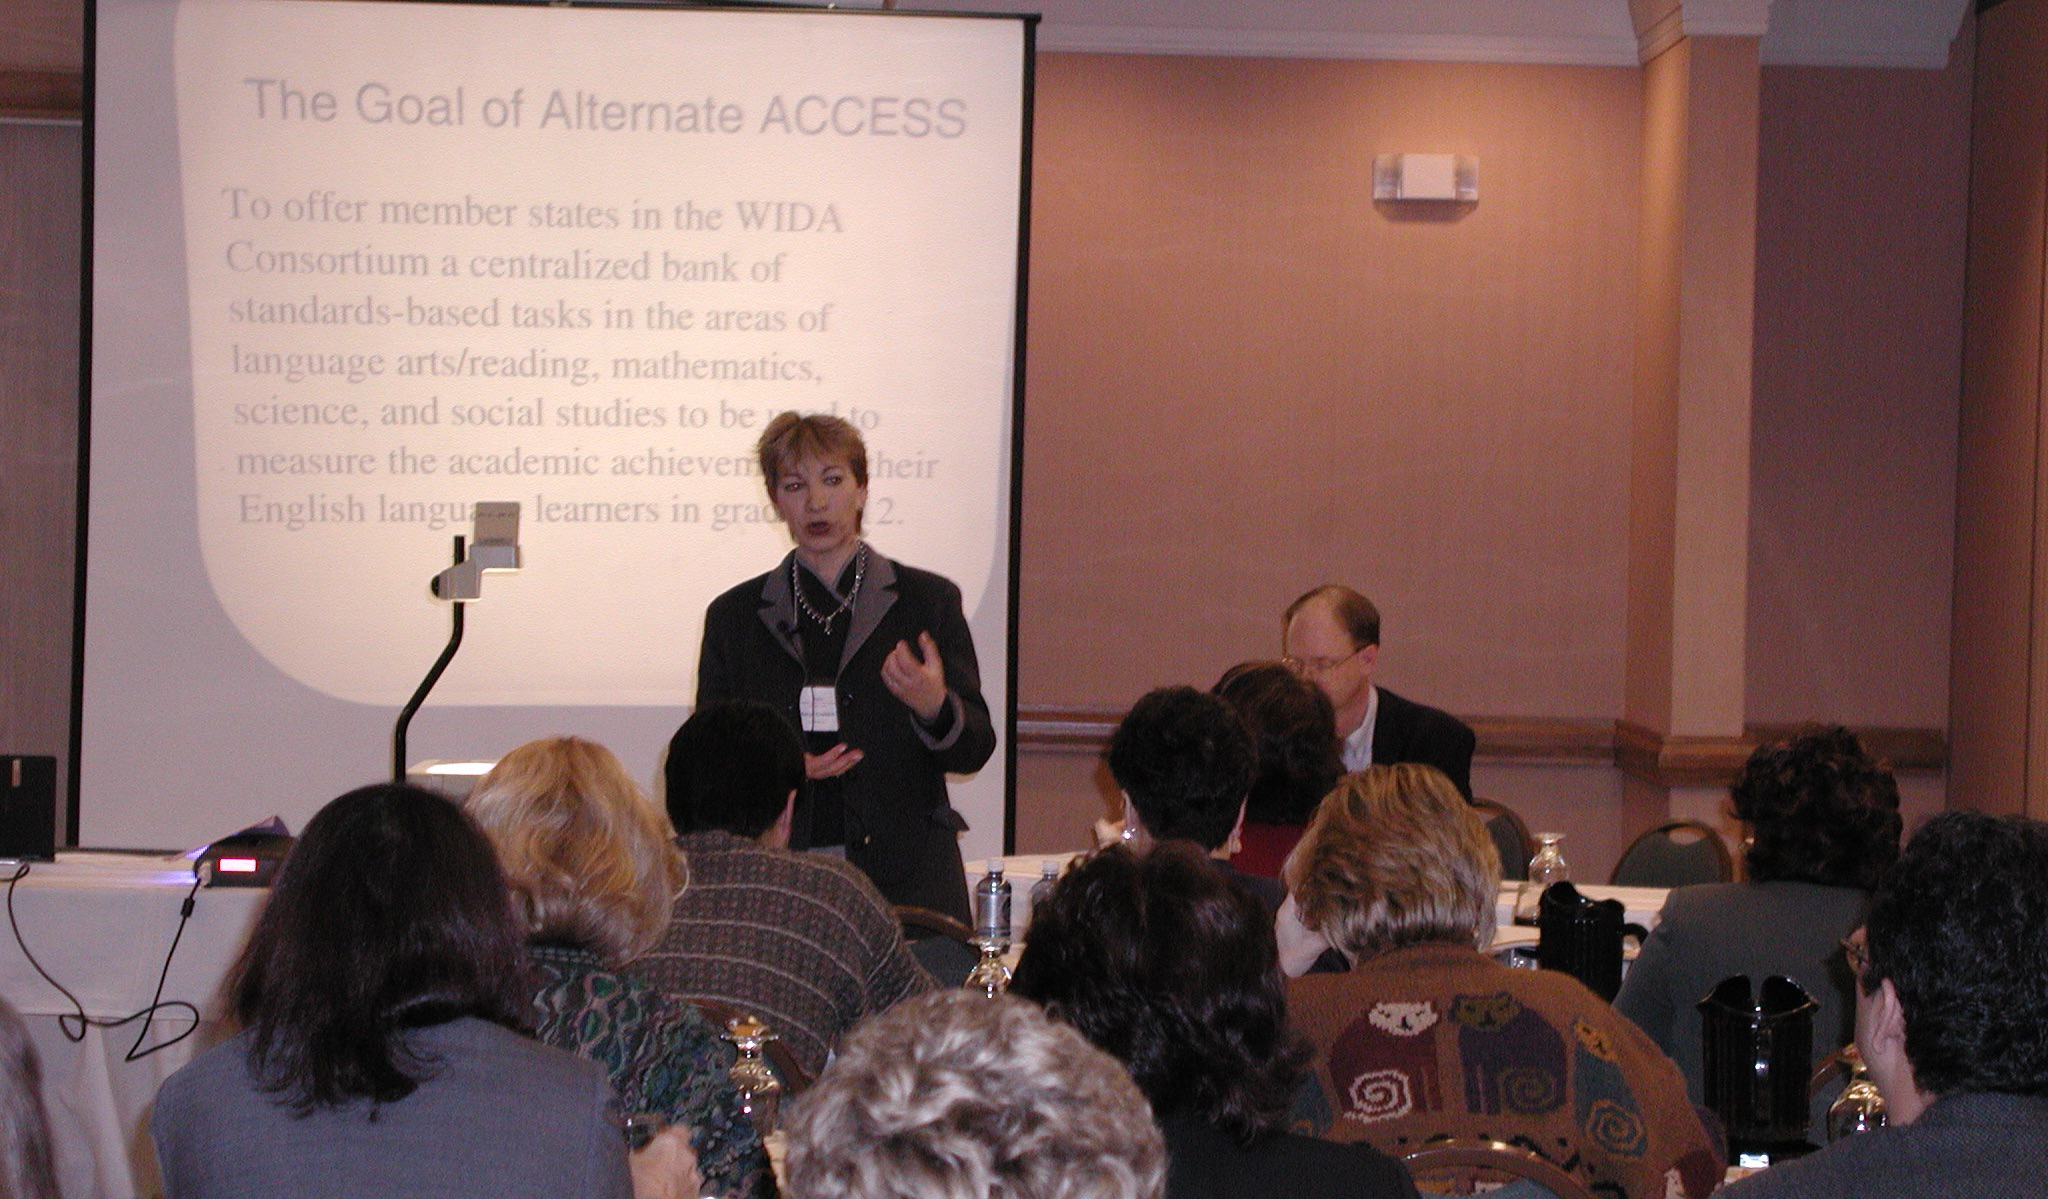 archive photo of margo gottlieb presenting to a group about WIDA using an overhead projector